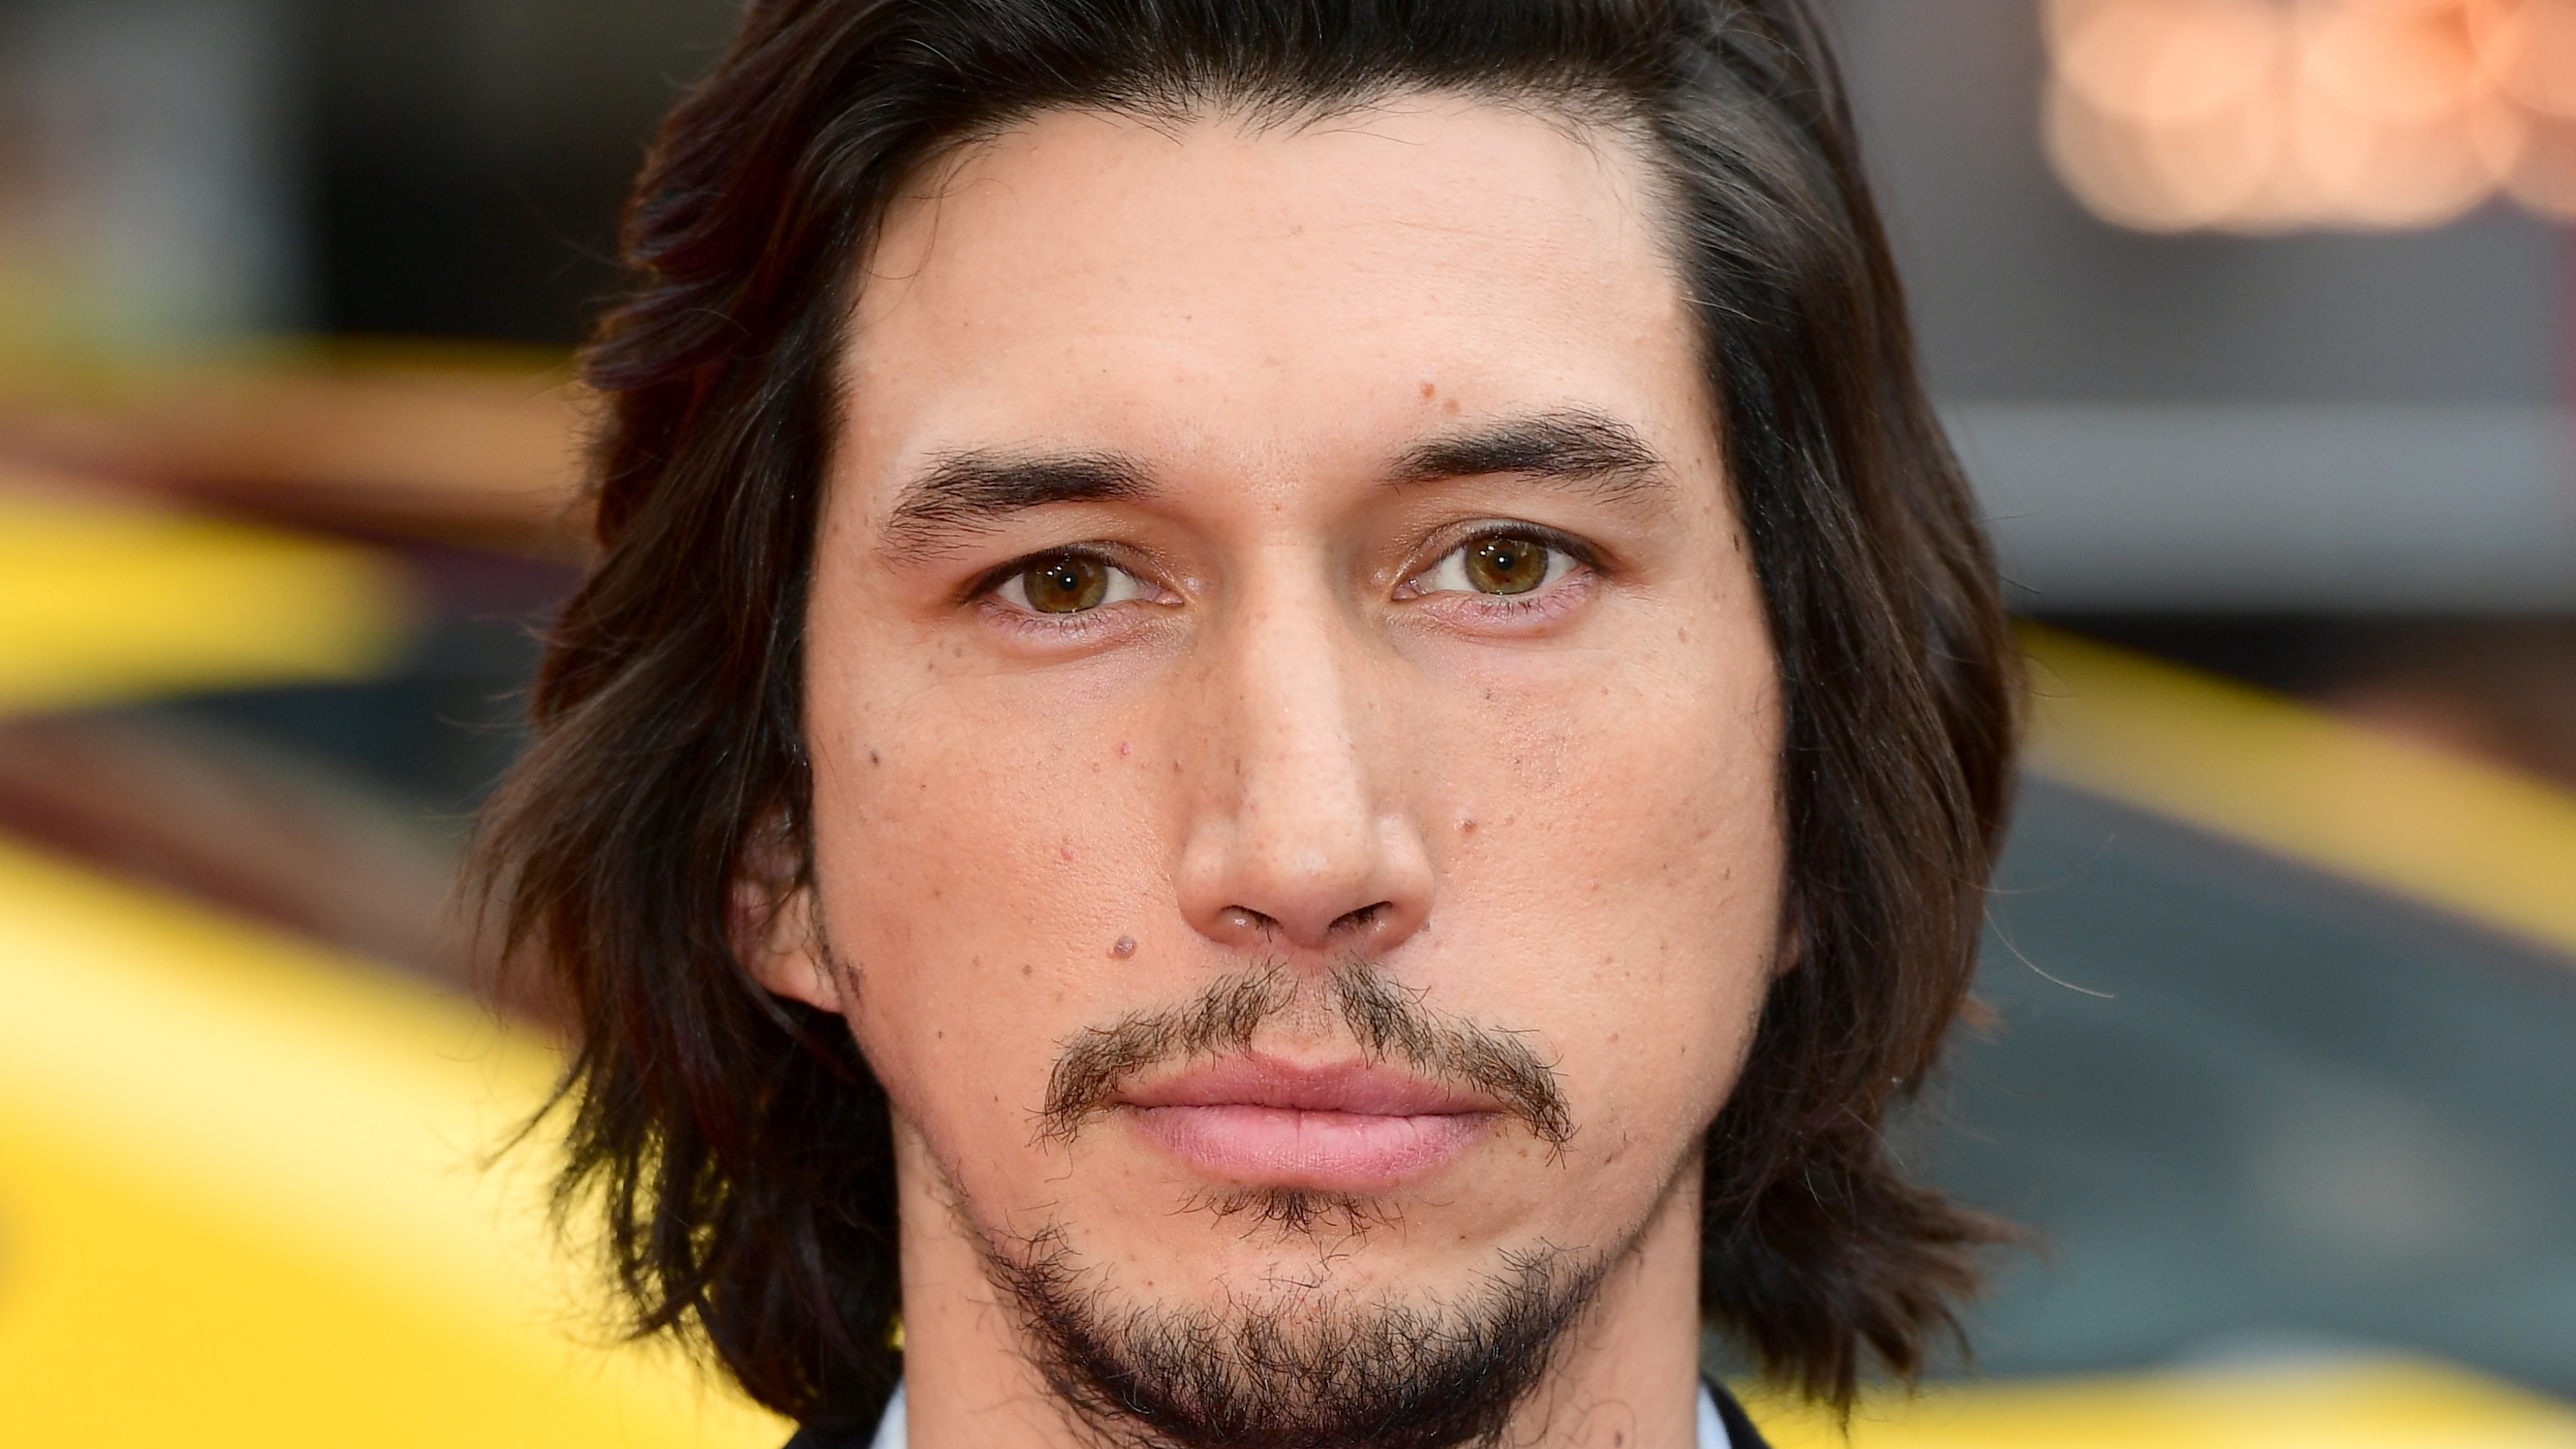 dedicated to actor adam driver - credit to original photo/video owner - not...